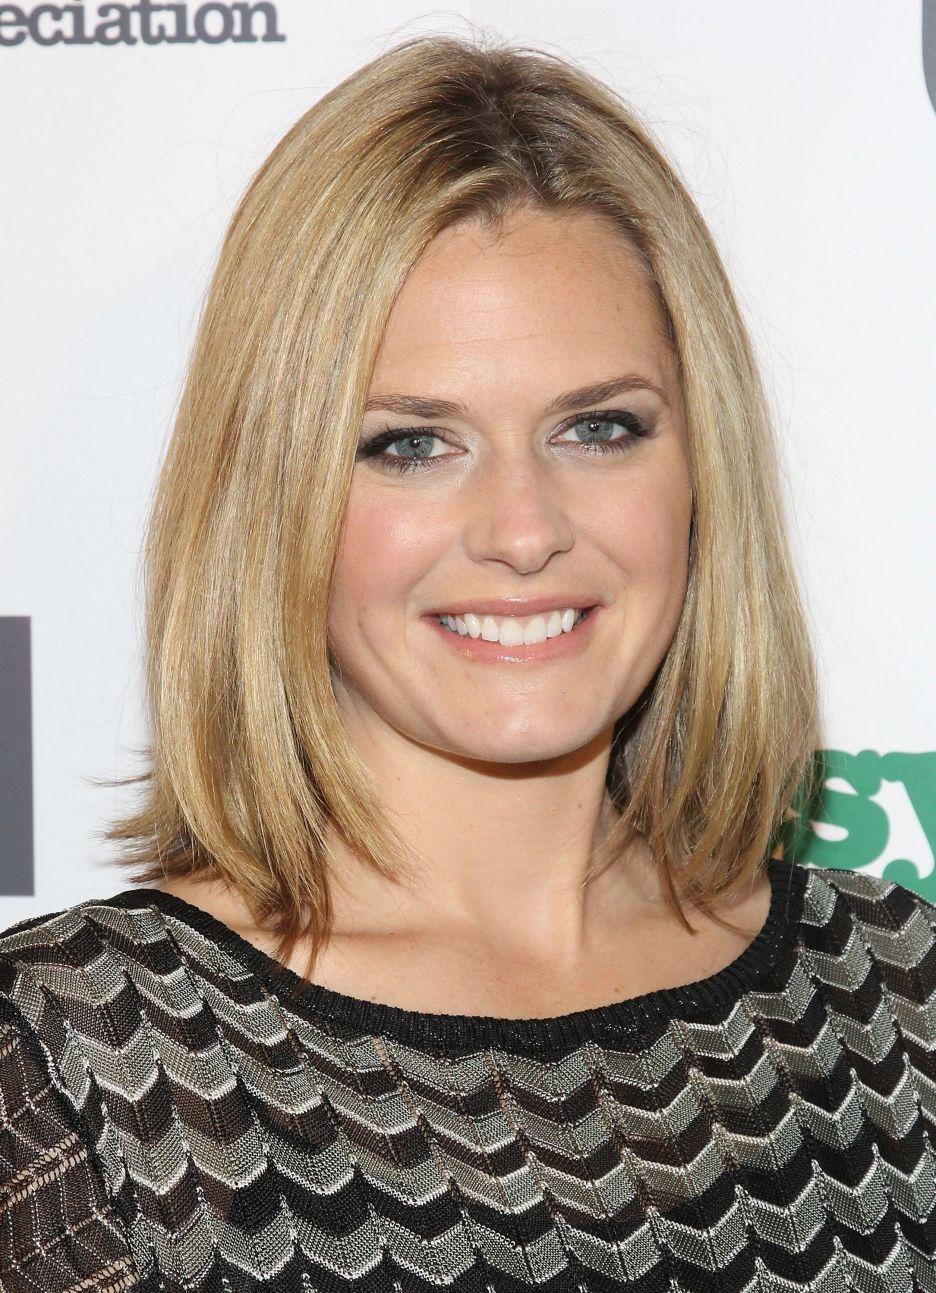 65+ Hot Pictures Of Maggie Lawson Will Melt You With Her Hotness Like A Marshmellow | Best Of Comic Books